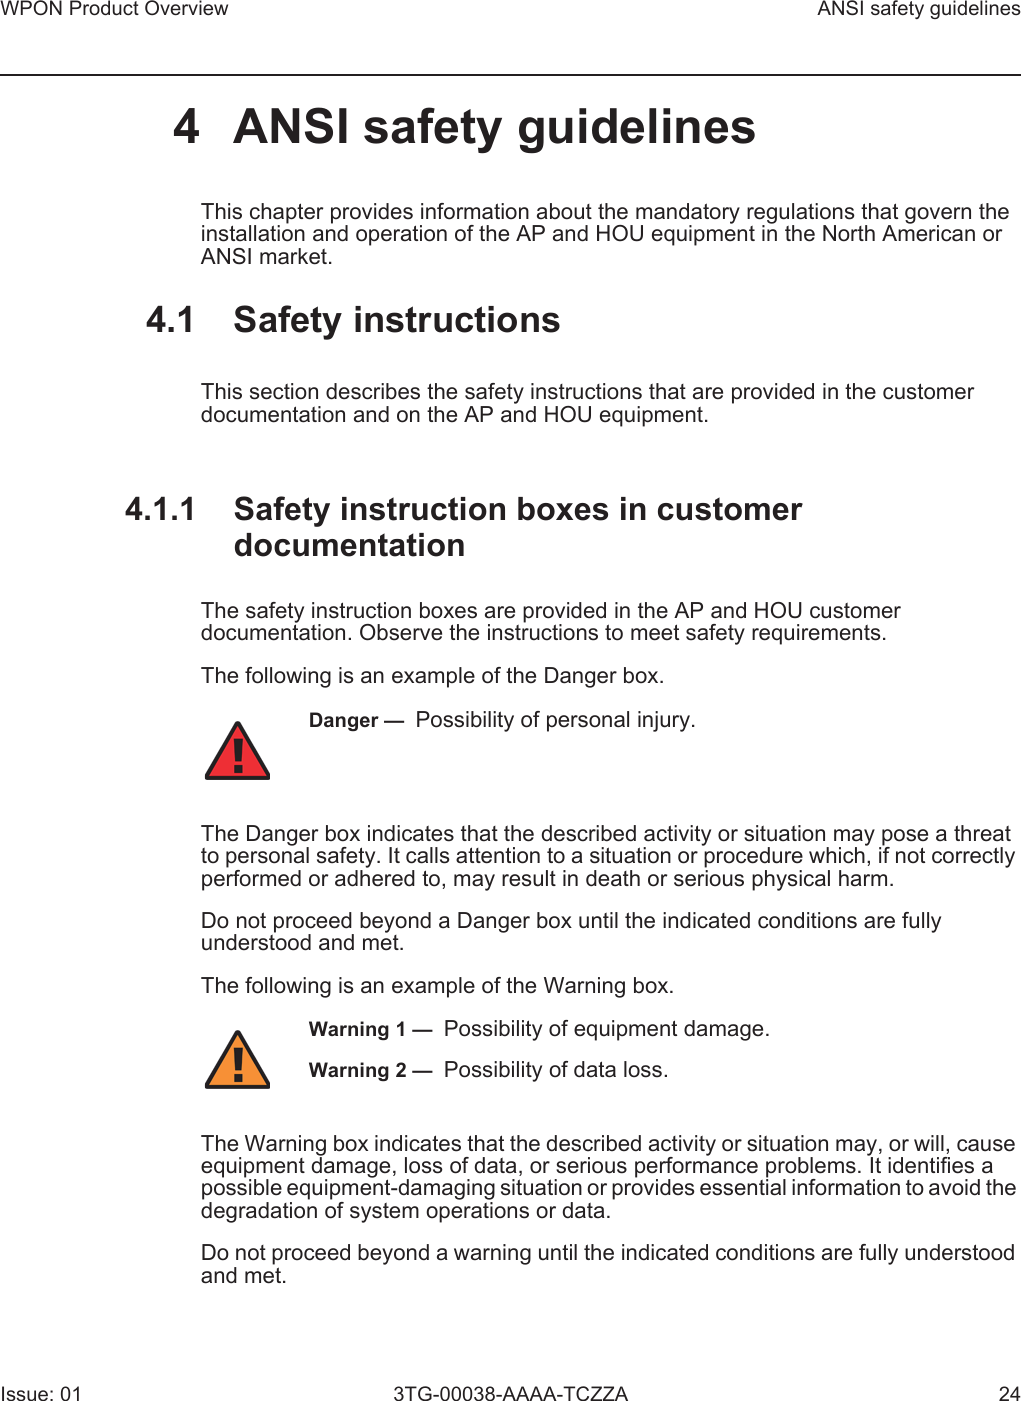 WPON Product Overview ANSI safety guidelinesIssue: 01 3TG-00038-AAAA-TCZZA 244 ANSI safety guidelinesThis chapter provides information about the mandatory regulations that govern the installation and operation of the AP and HOU equipment in the North American or ANSI market.4.1 Safety instructionsThis section describes the safety instructions that are provided in the customer documentation and on the AP and HOU equipment.4.1.1 Safety instruction boxes in customer documentationThe safety instruction boxes are provided in the AP and HOU customer documentation. Observe the instructions to meet safety requirements.The following is an example of the Danger box.The Danger box indicates that the described activity or situation may pose a threat to personal safety. It calls attention to a situation or procedure which, if not correctly performed or adhered to, may result in death or serious physical harm. Do not proceed beyond a Danger box until the indicated conditions are fully understood and met.The following is an example of the Warning box.The Warning box indicates that the described activity or situation may, or will, cause equipment damage, loss of data, or serious performance problems. It identifies a possible equipment-damaging situation or provides essential information to avoid the degradation of system operations or data.Do not proceed beyond a warning until the indicated conditions are fully understood and met.Danger —  Possibility of personal injury. Warning 1 —  Possibility of equipment damage.Warning 2 —  Possibility of data loss.